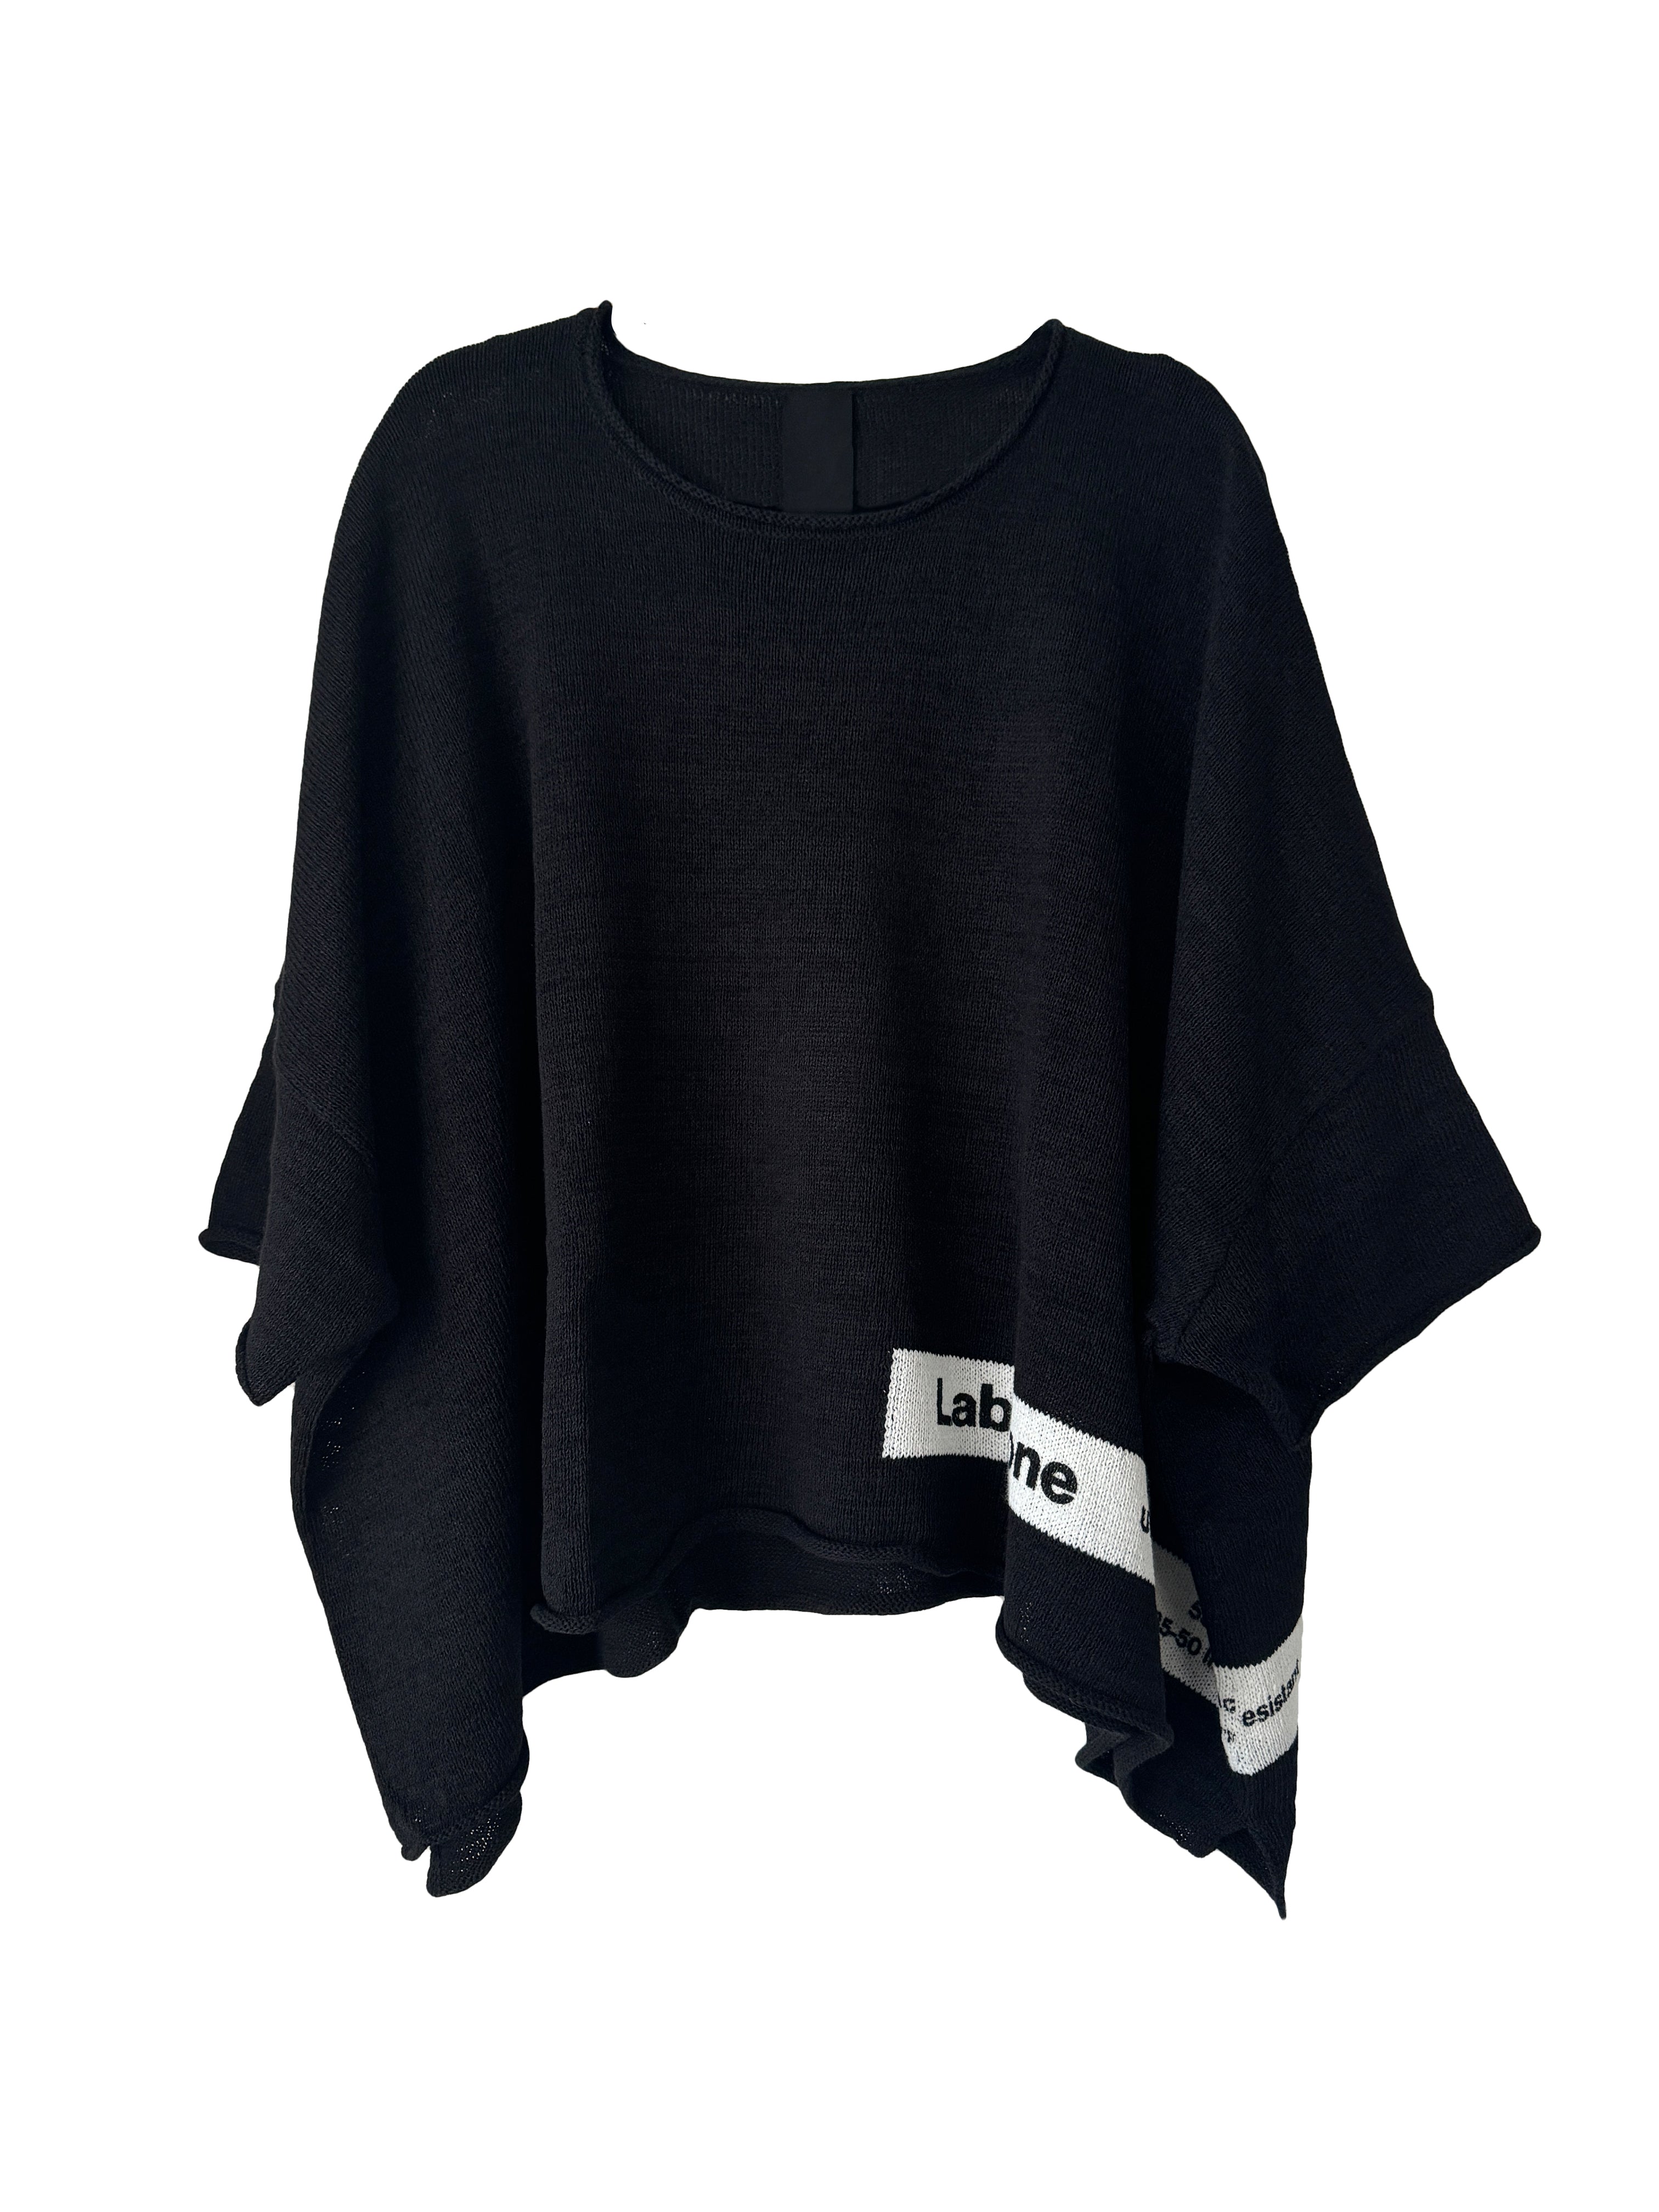 RELAXED KNIT PULLOVER BLACK PRINT